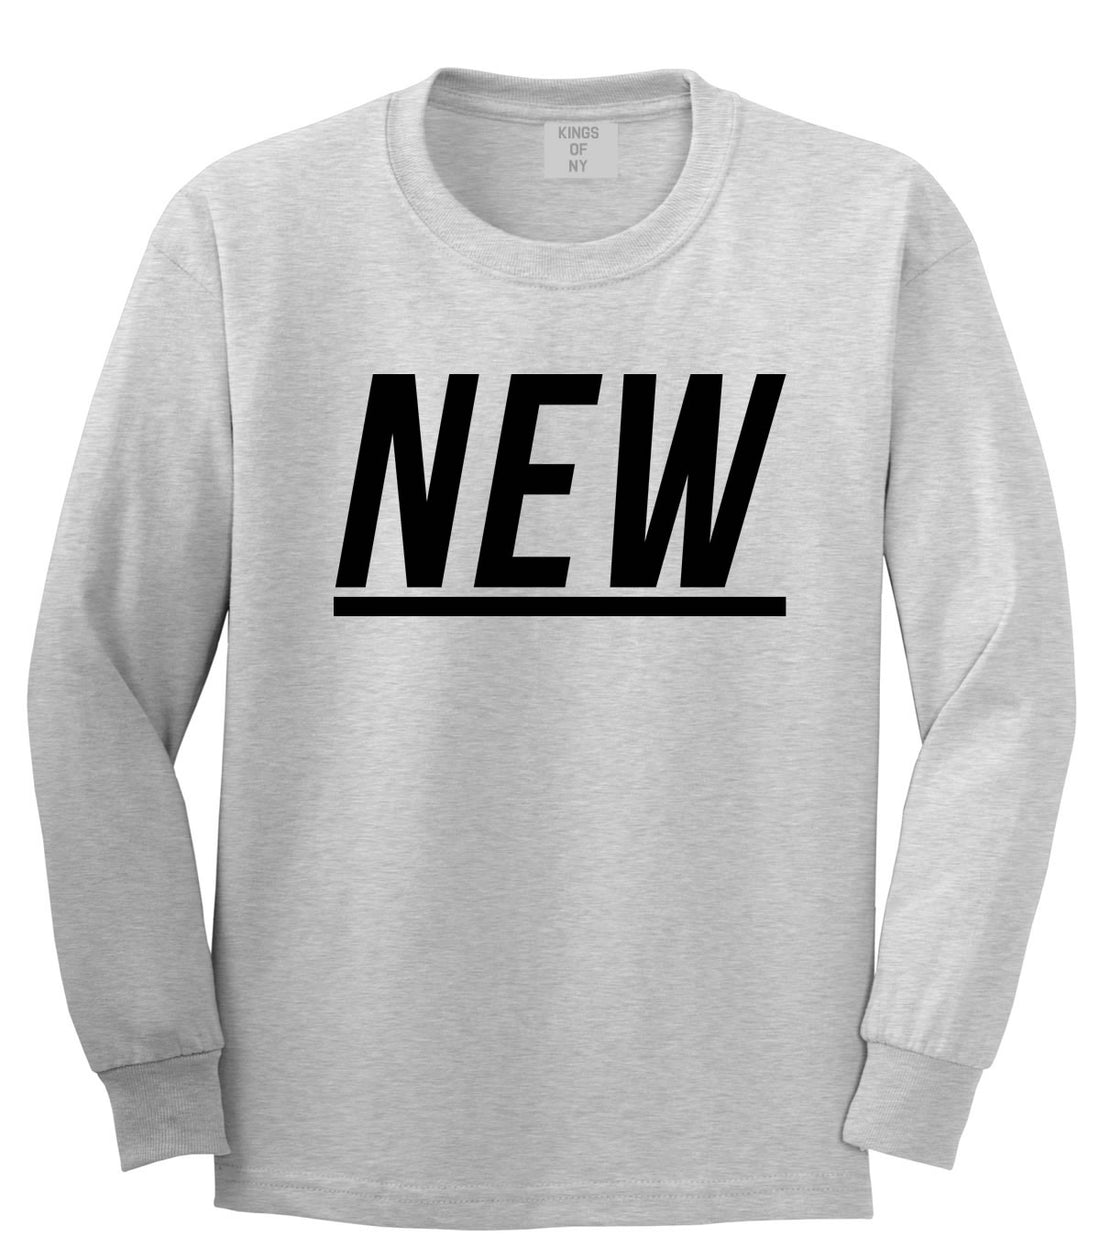 New Long Sleeve T-Shirt in Grey by Kings Of NY